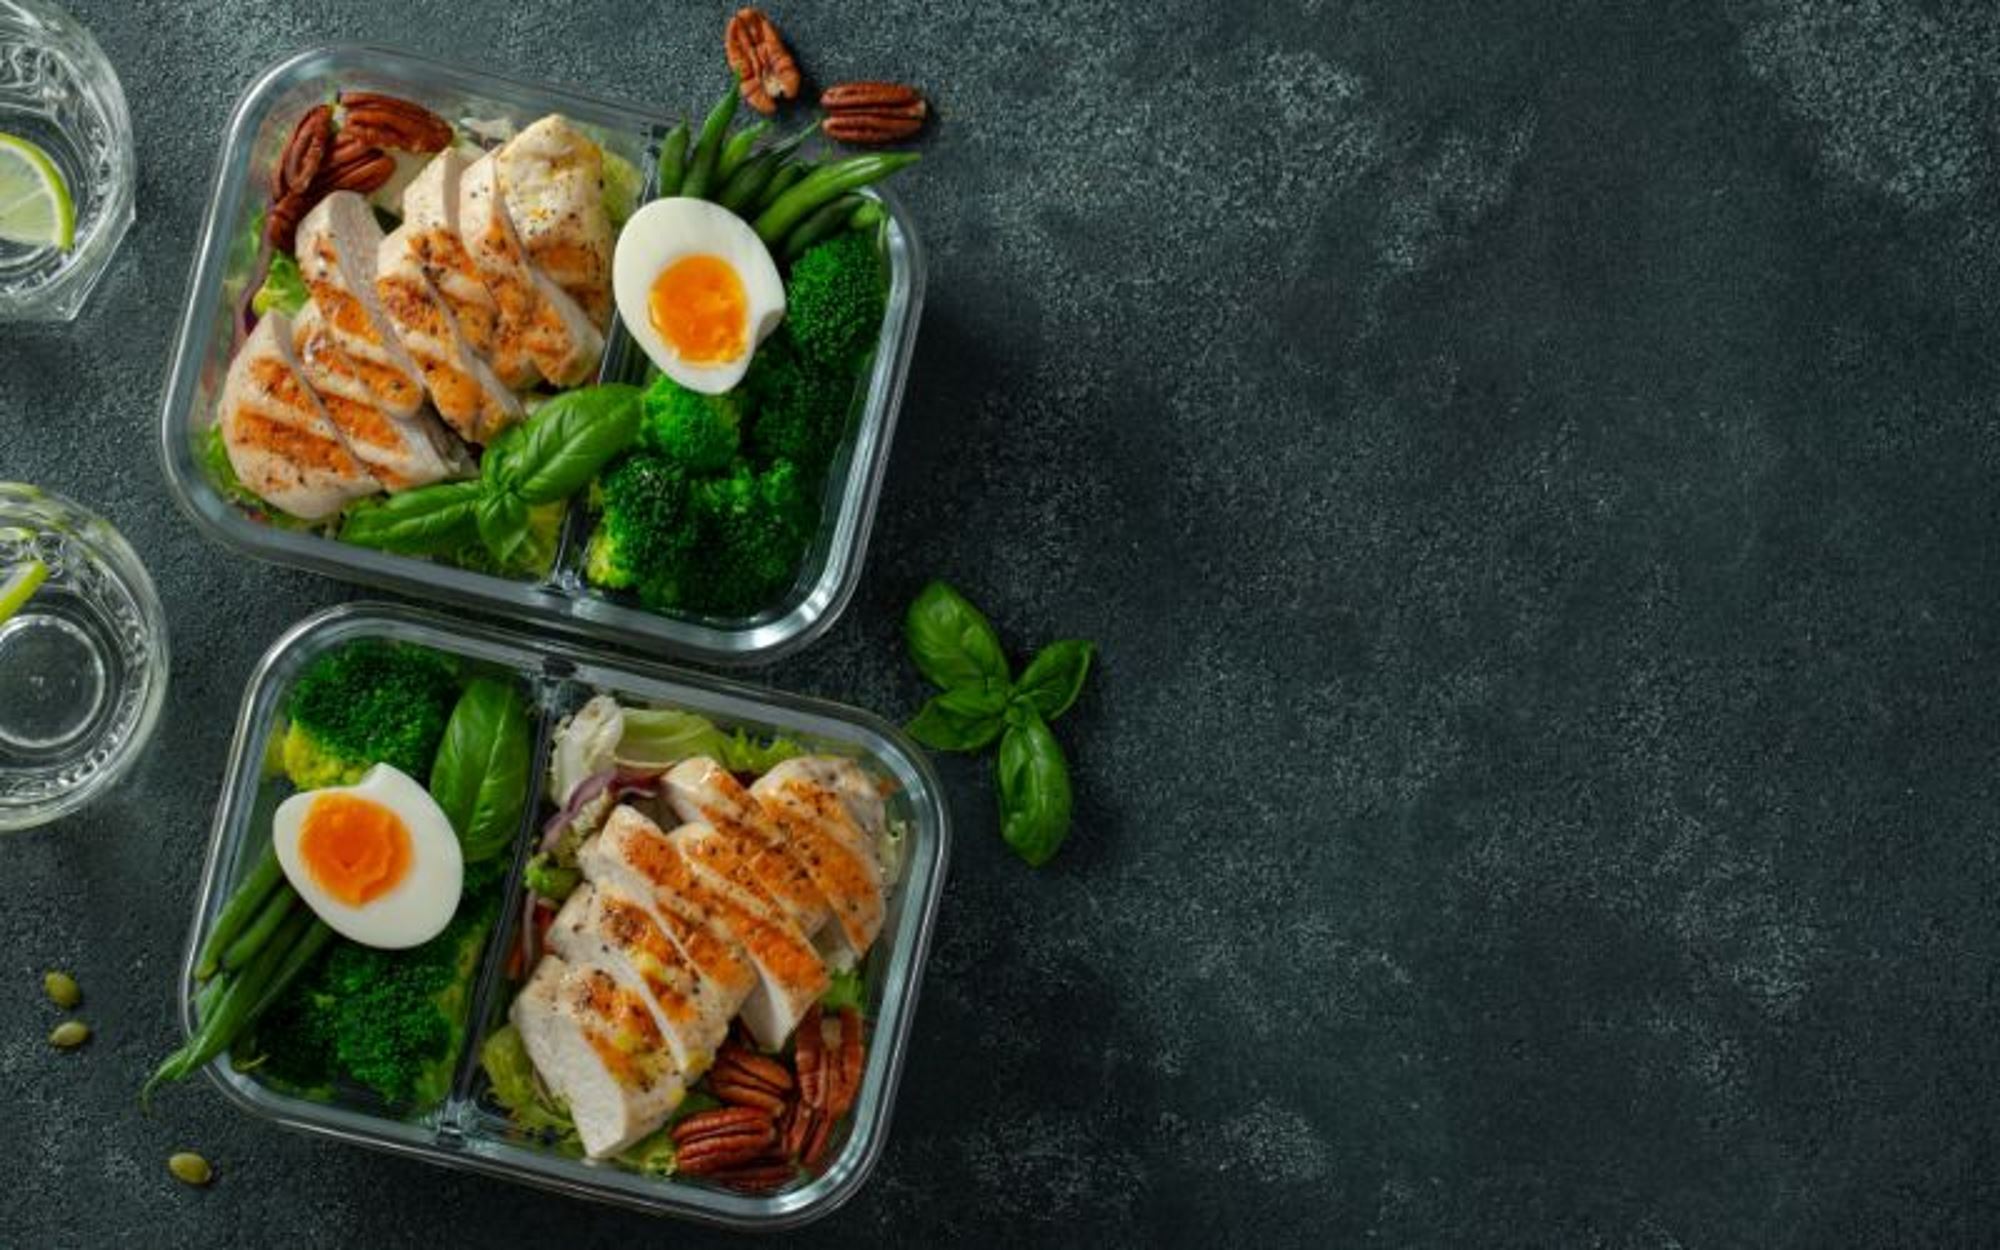 The keto diet meal prep delivery service